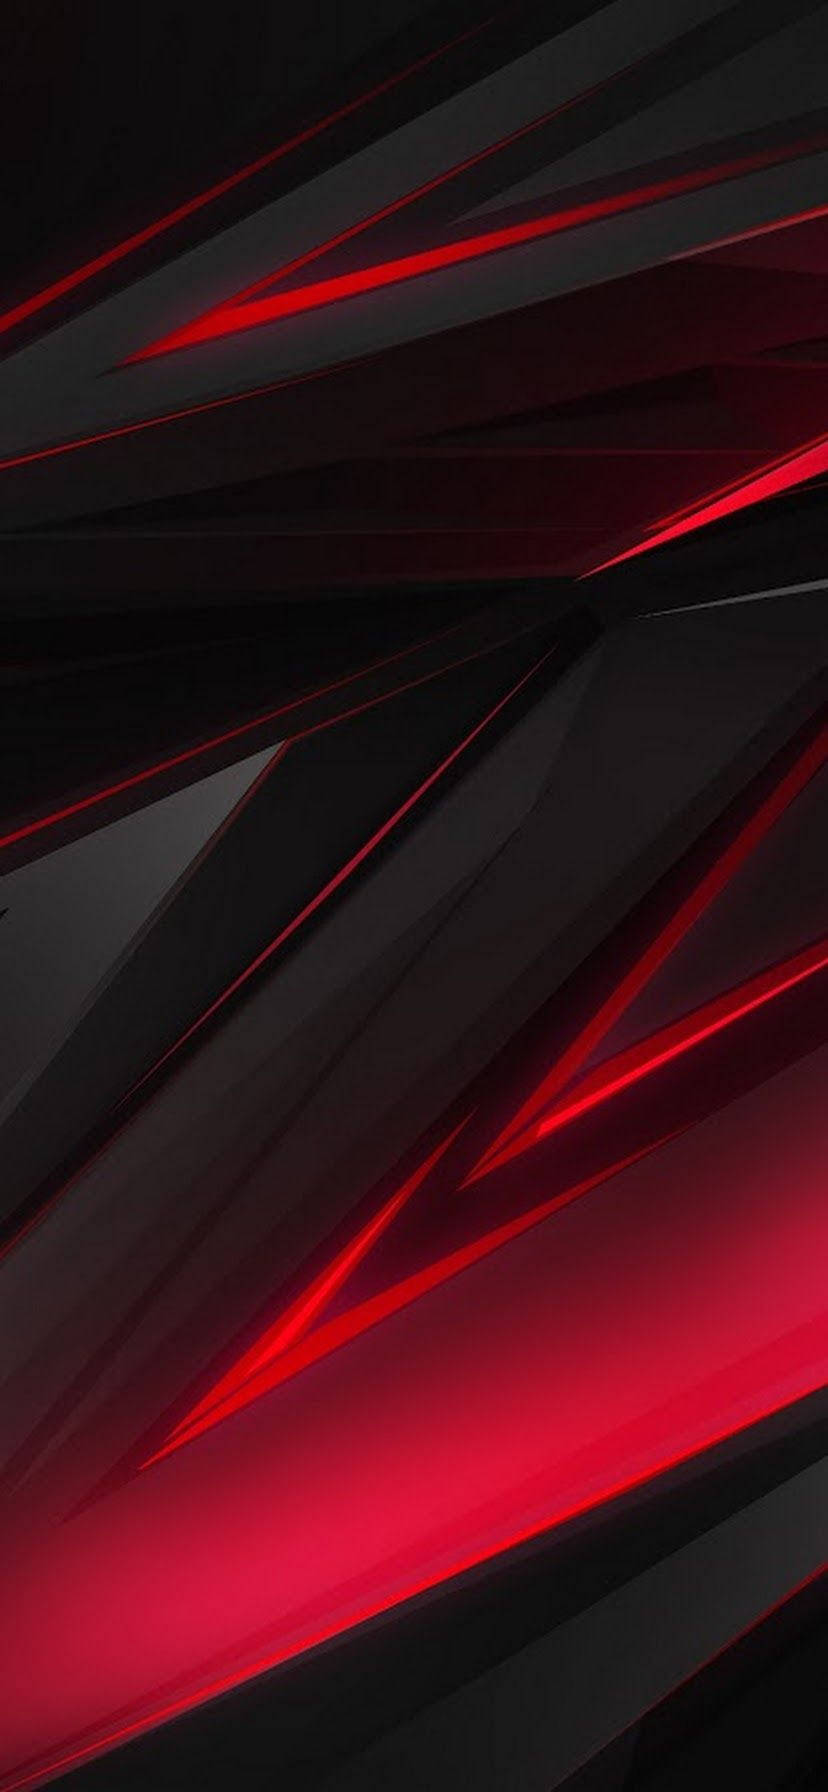 Iphone Xr Red Magic Strips Abstract Wallpaper